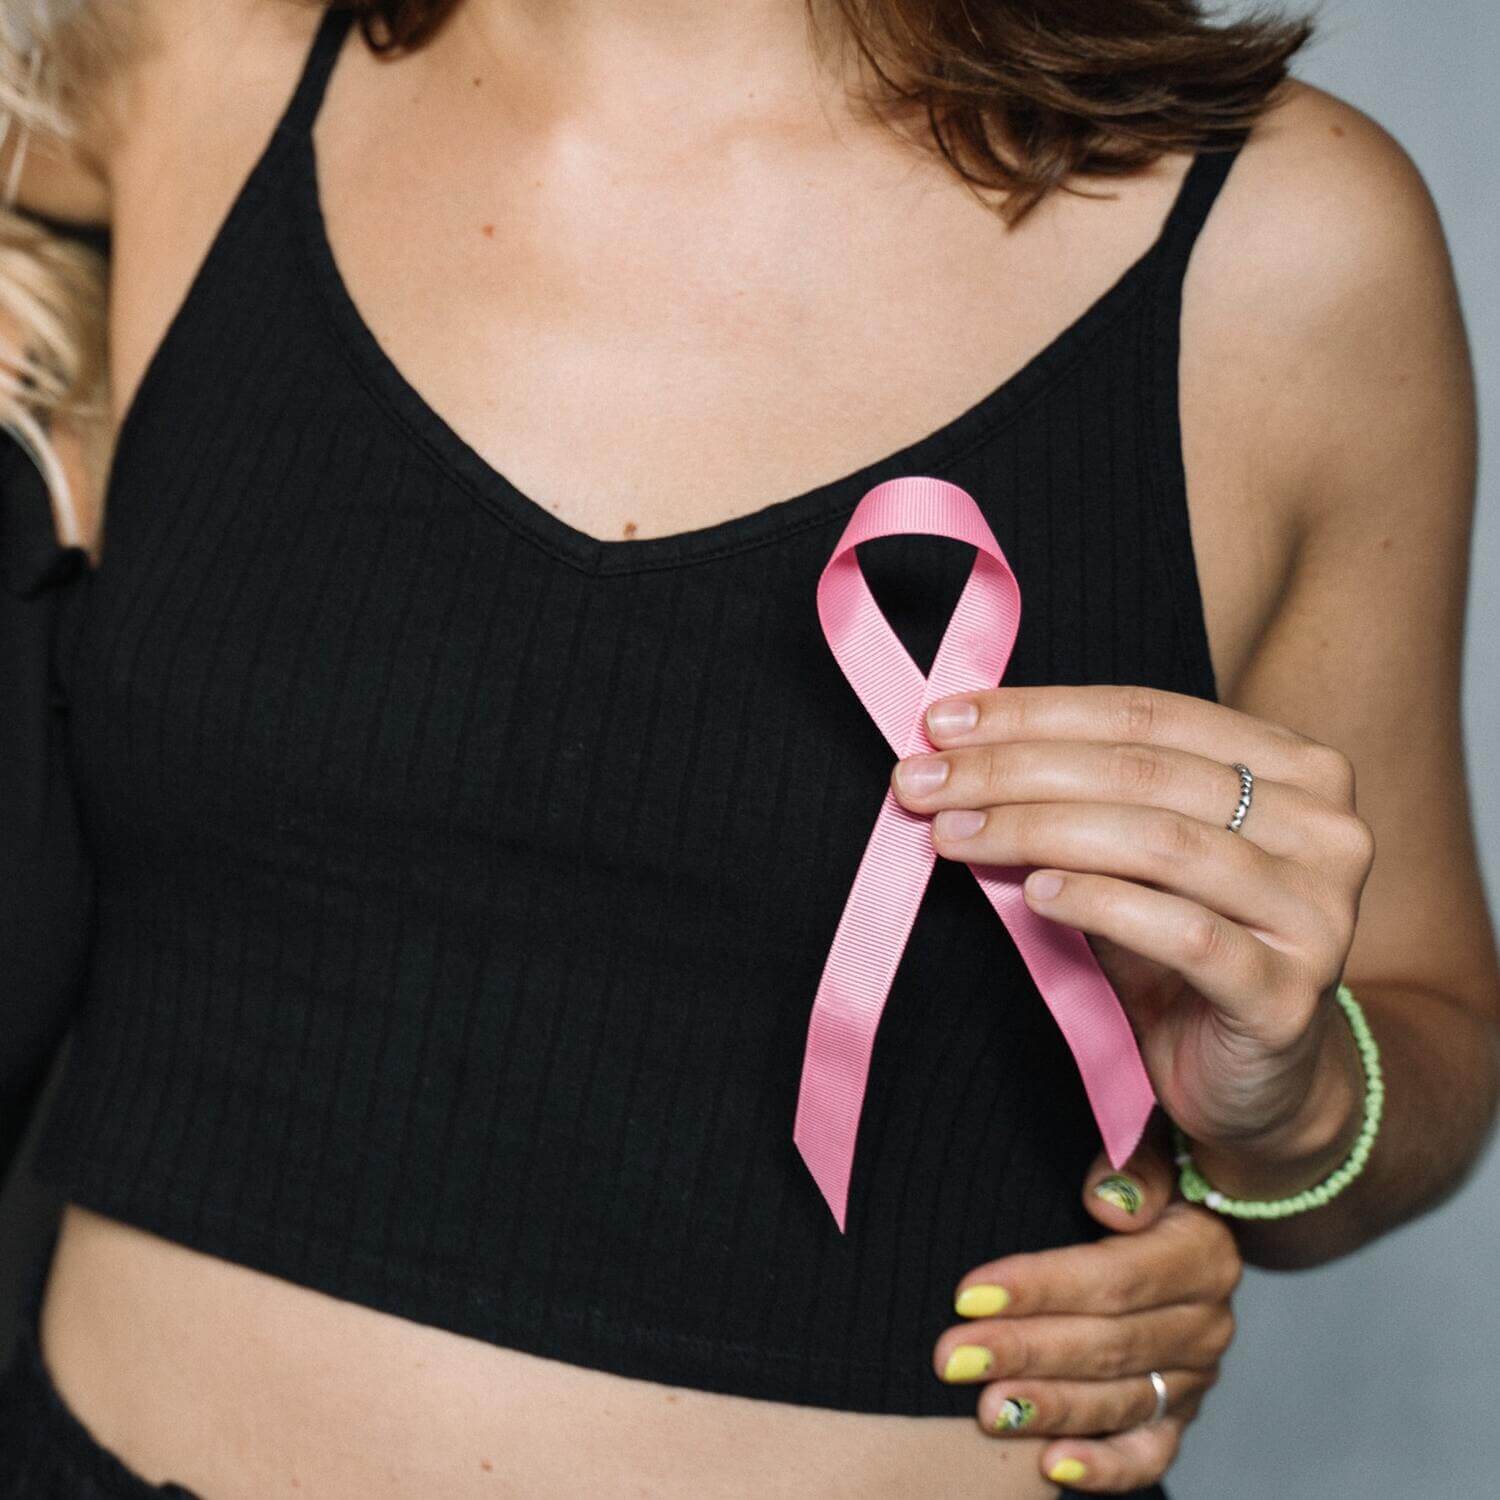 10 Breast Cancer Fundraising Ideas for Work Perci Health